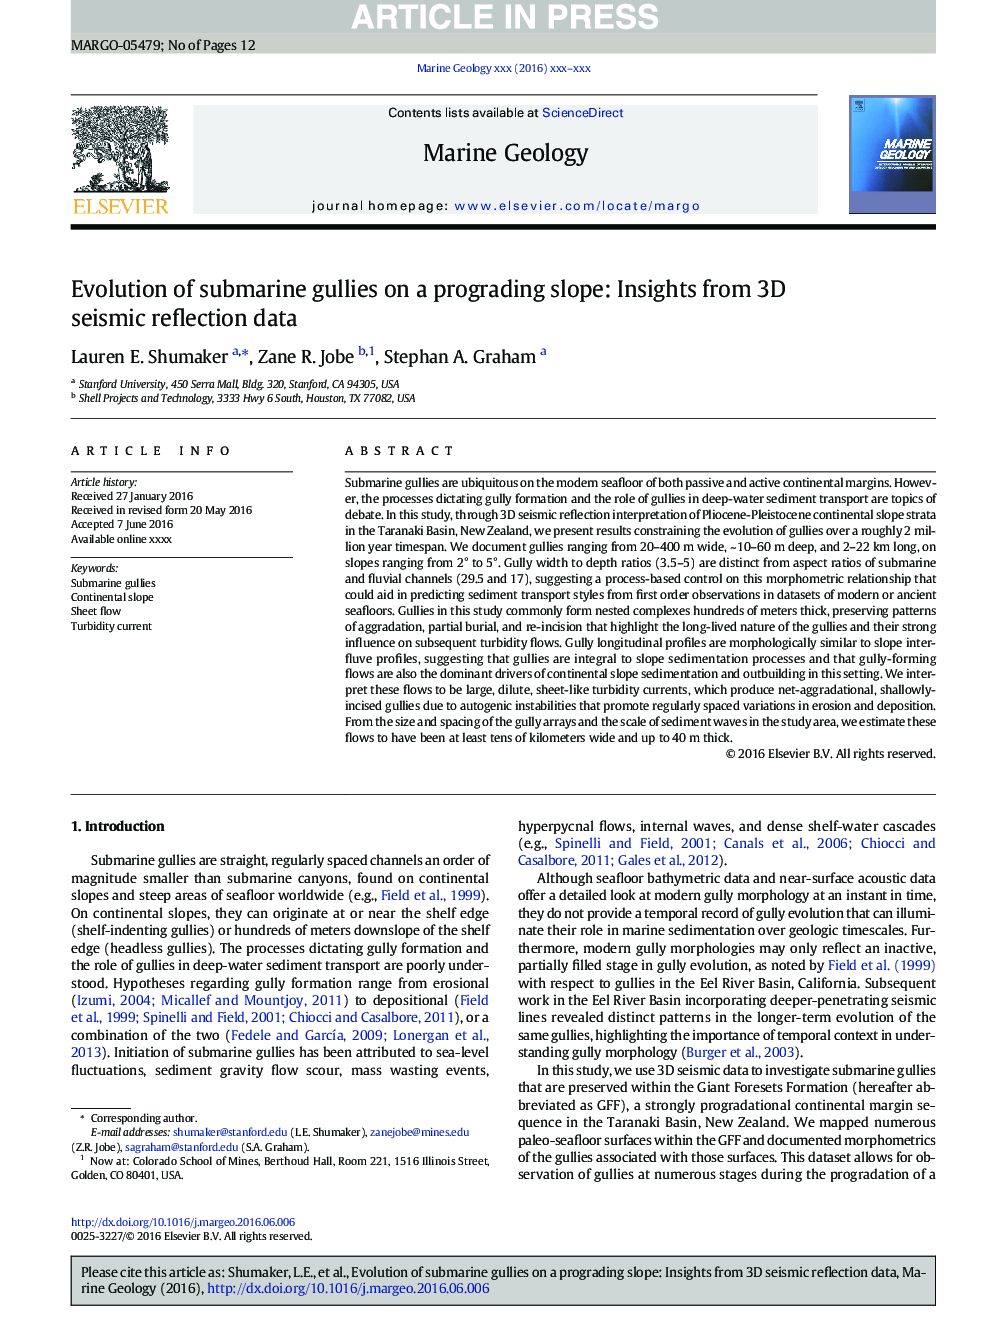 Evolution of submarine gullies on a prograding slope: Insights from 3D seismic reflection data